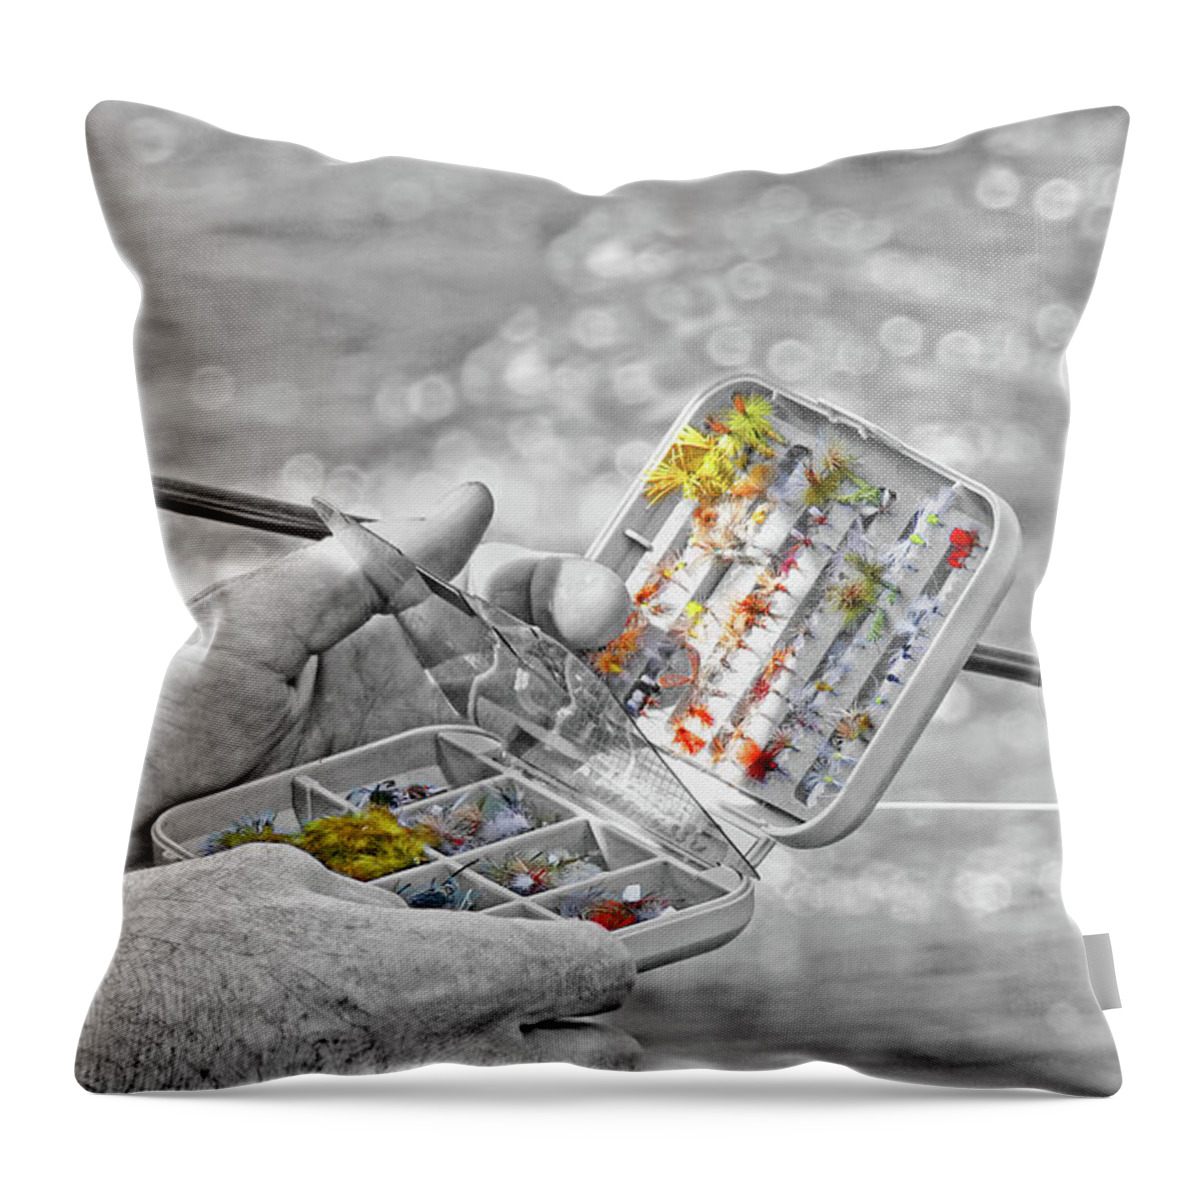 Fly Box Throw Pillow featuring the photograph The Fly Box Monochrome by Jennie Marie Schell